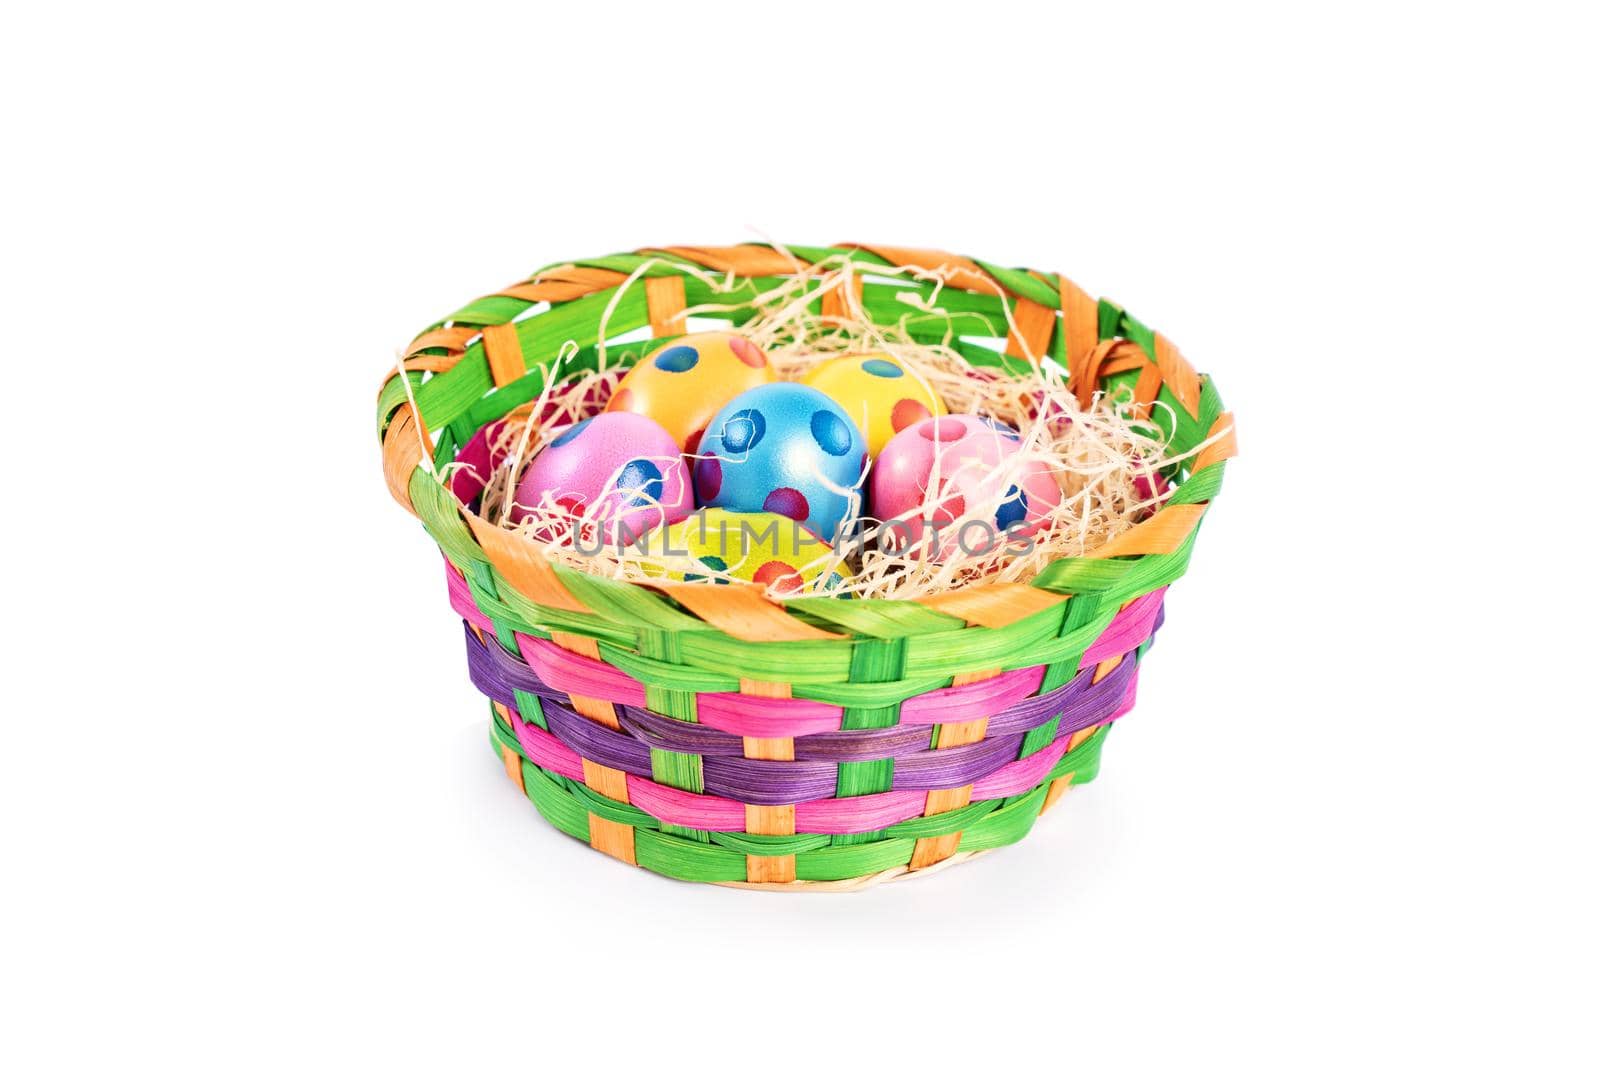 Colourful Easter eggs with polka dots in a basket, isolated on white background. Easter celebration concept.